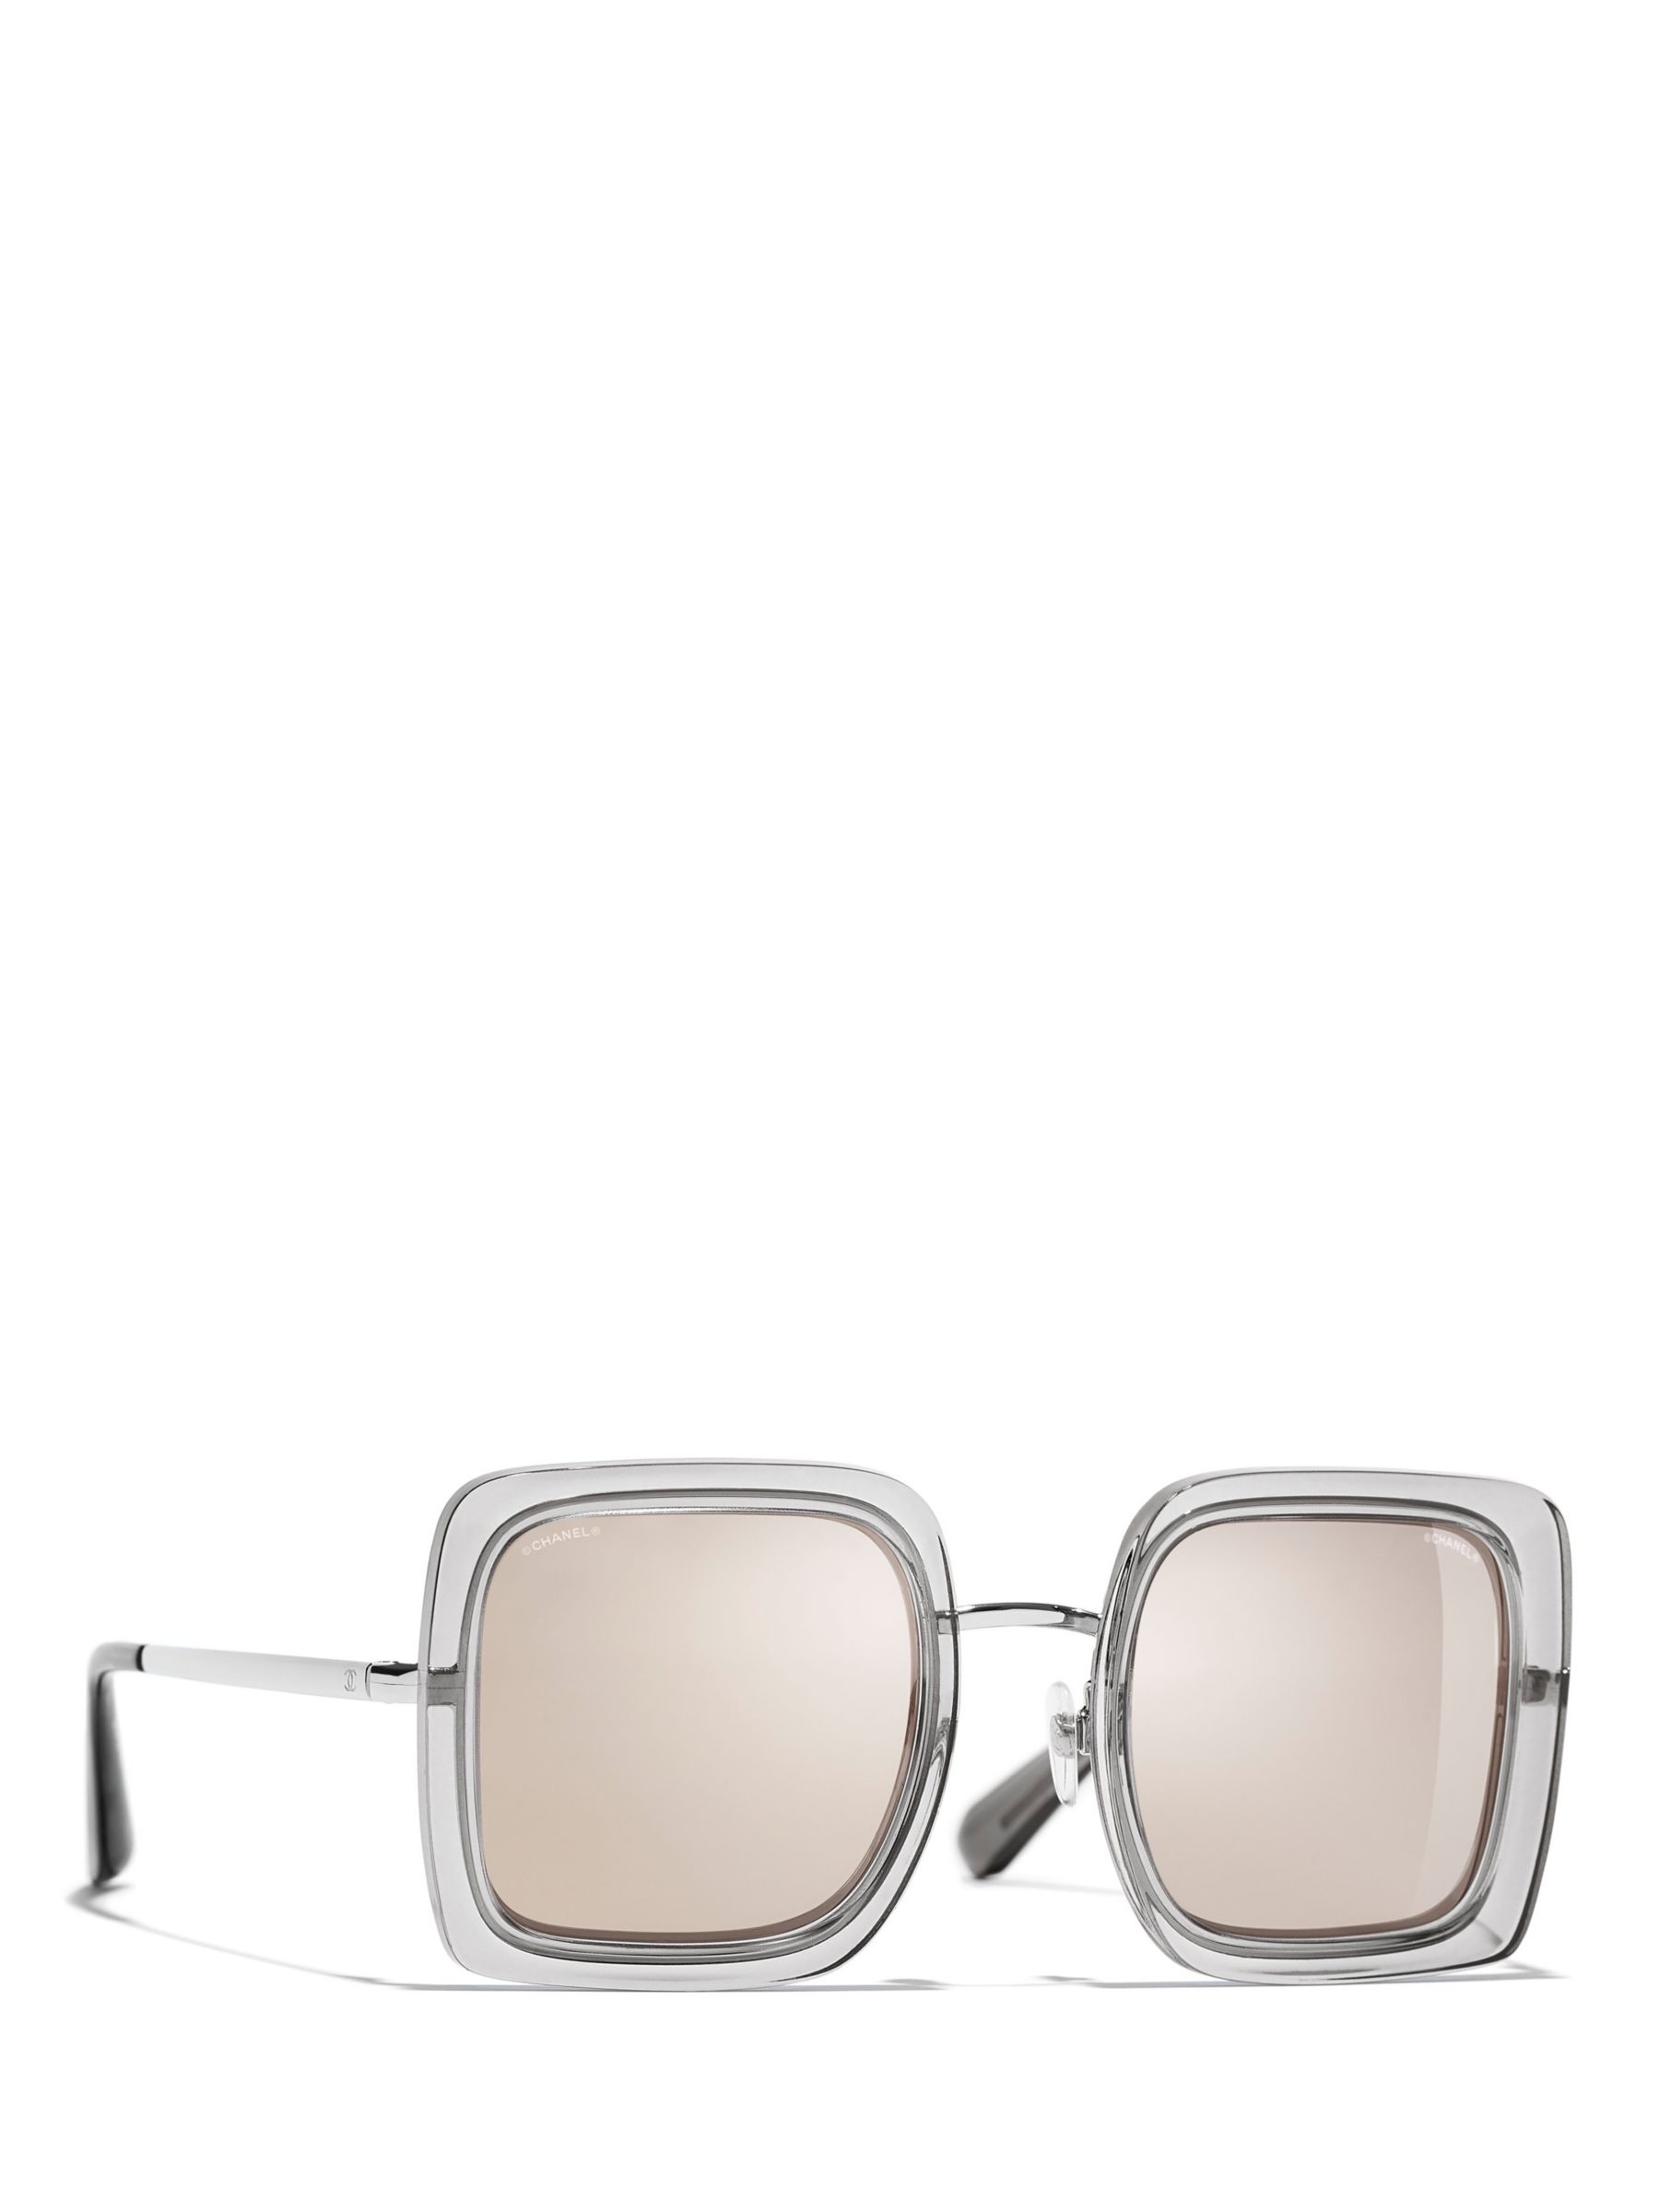 CHANEL Square Sunglasses CH4240 Grey/Mirror Clear at John Lewis